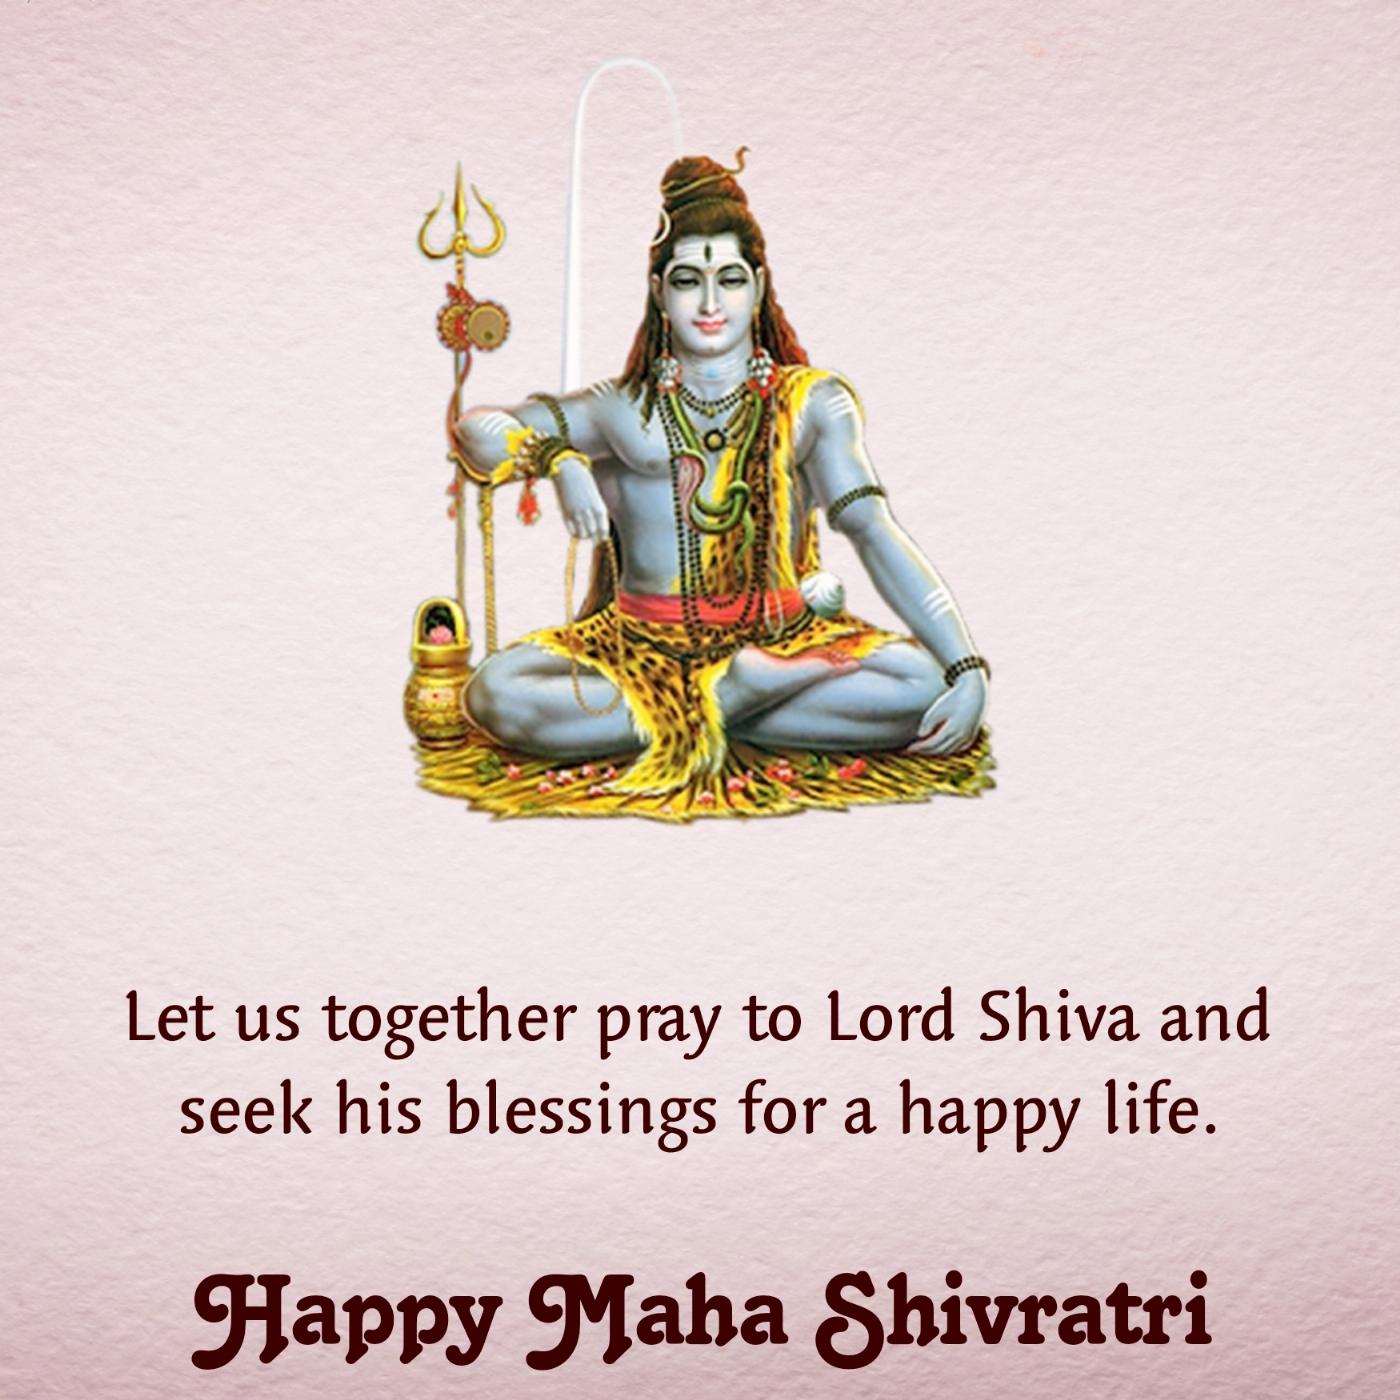 Let us together pray to Lord Shiva and seek his blessings